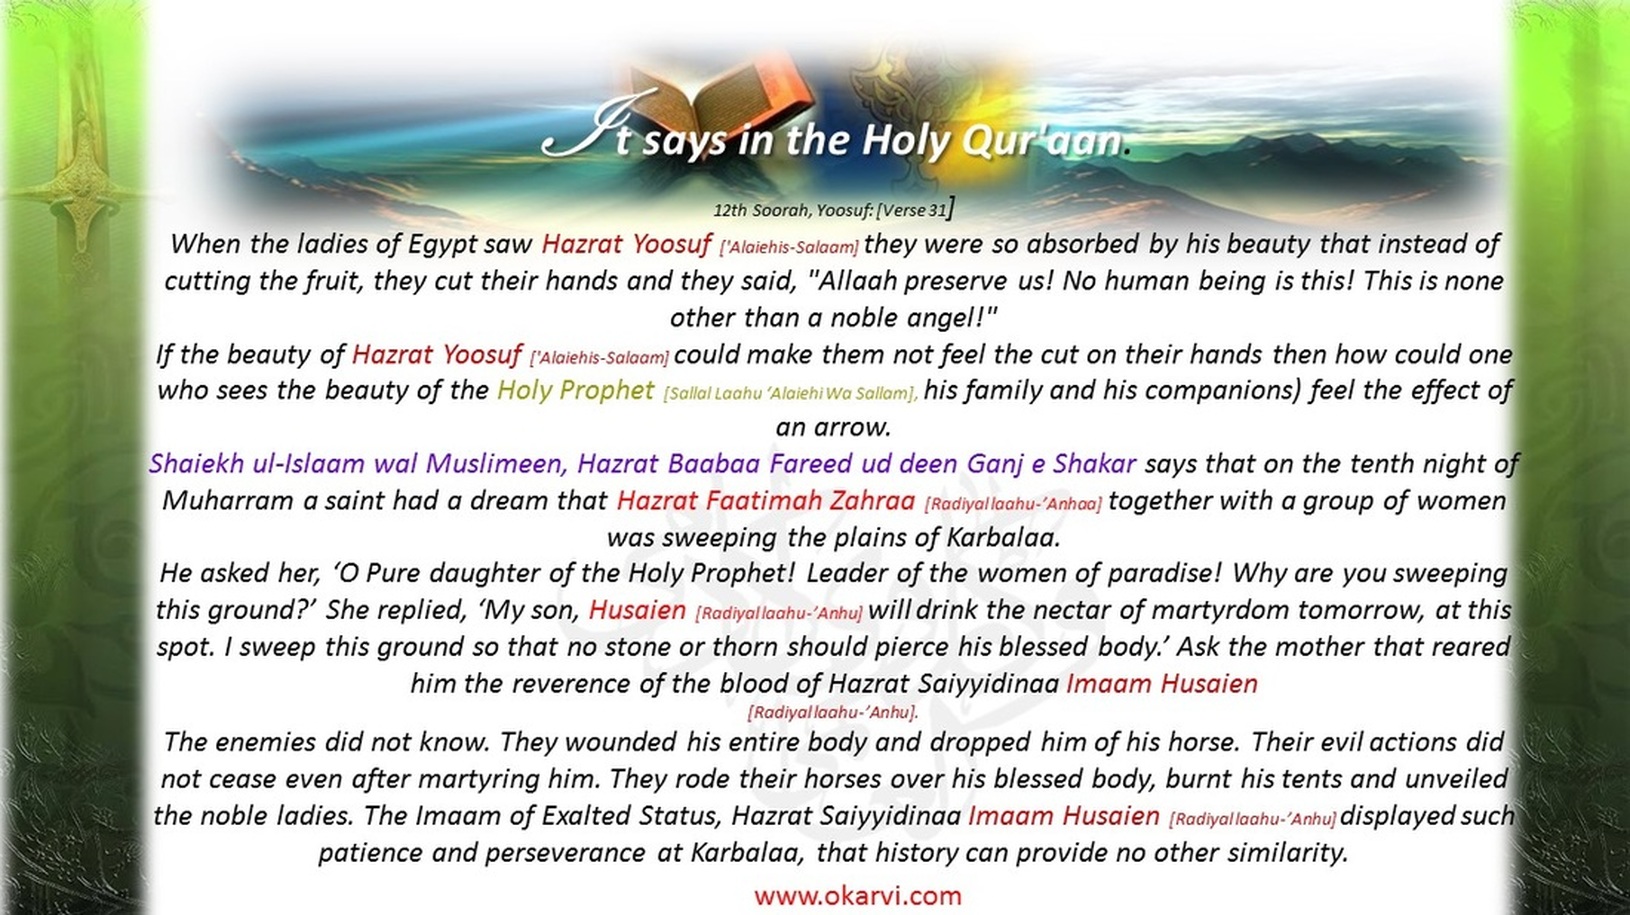 events of karbala page 4 full story